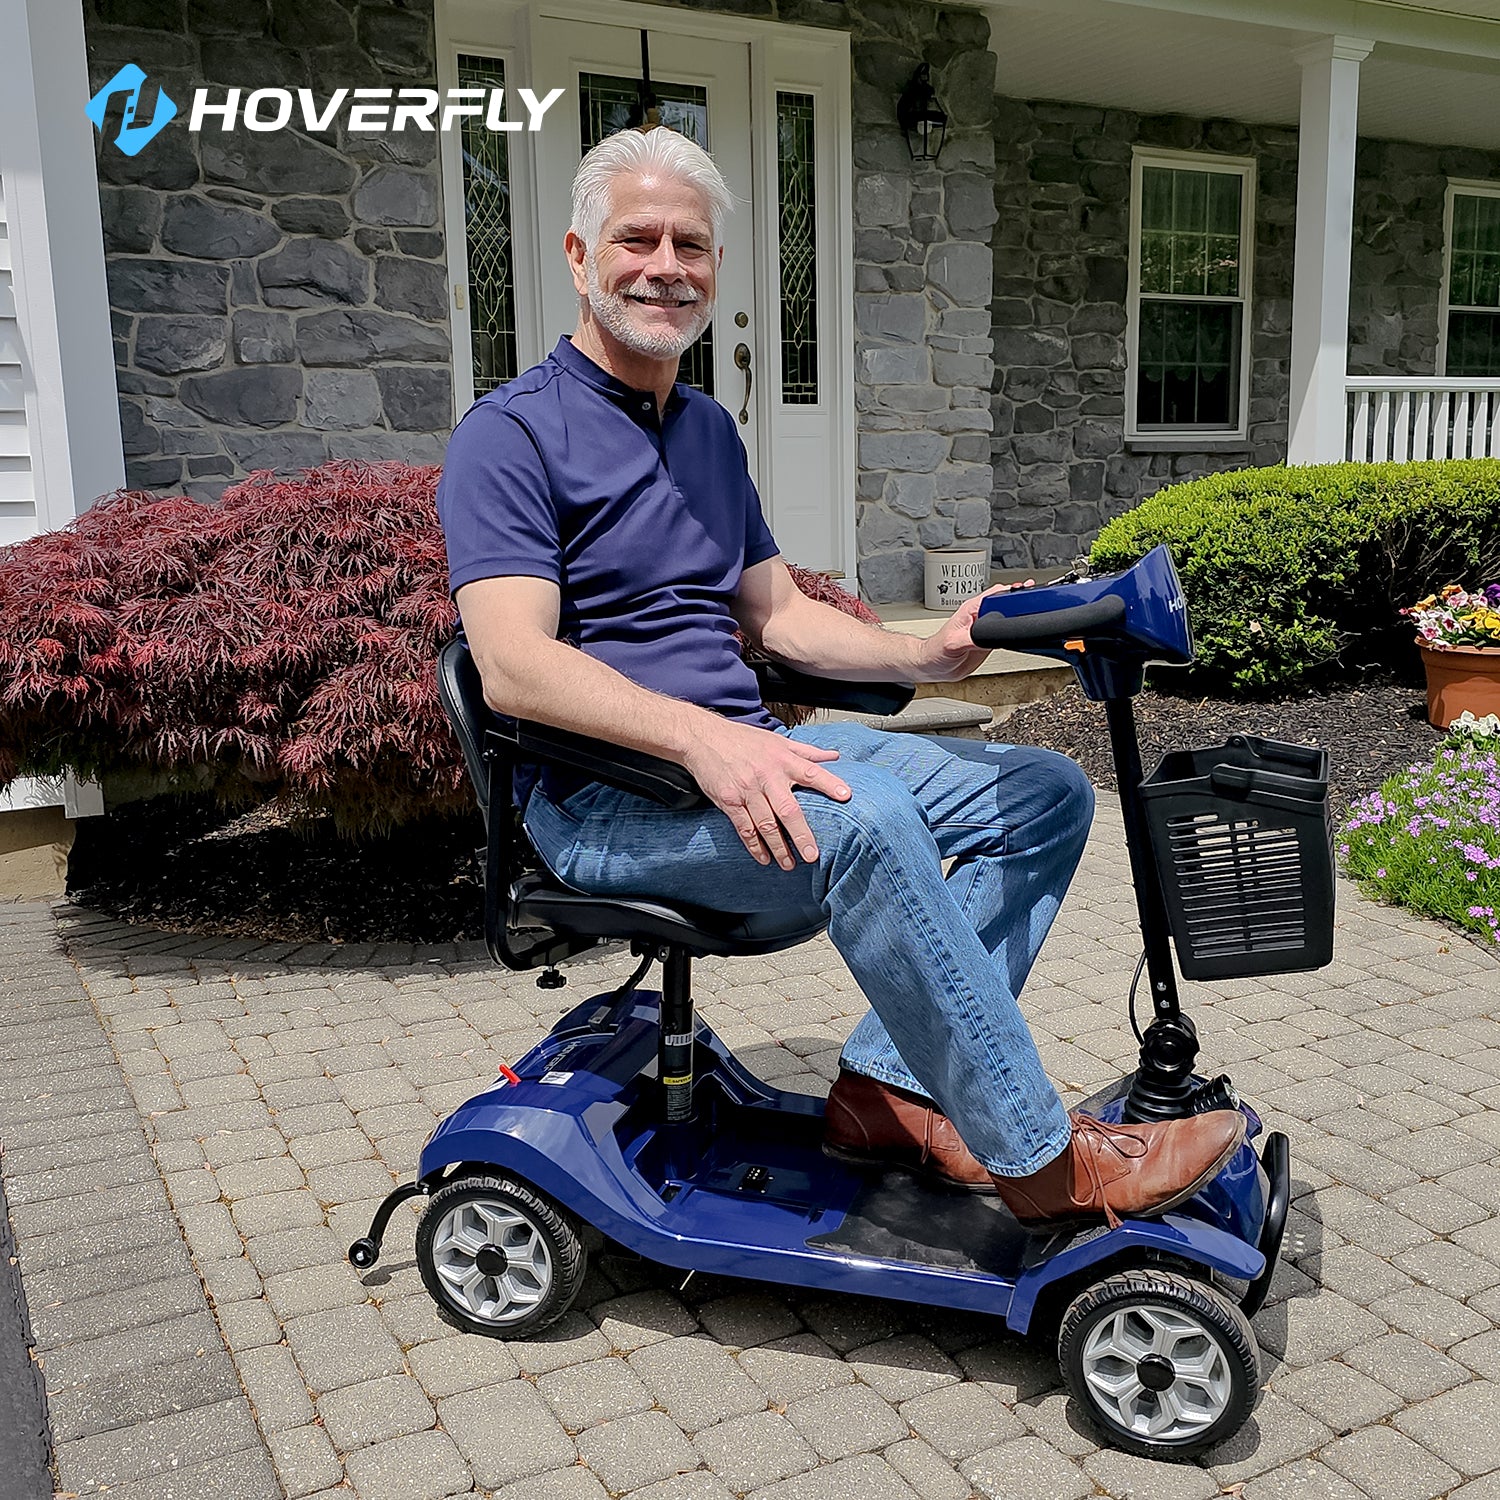 Elderly Gentleman Smoothly Navigates Blue Hoverfly T4 Scooter on Serene Lawn, Highlighting Stylish Design & Courtyard Harmony.